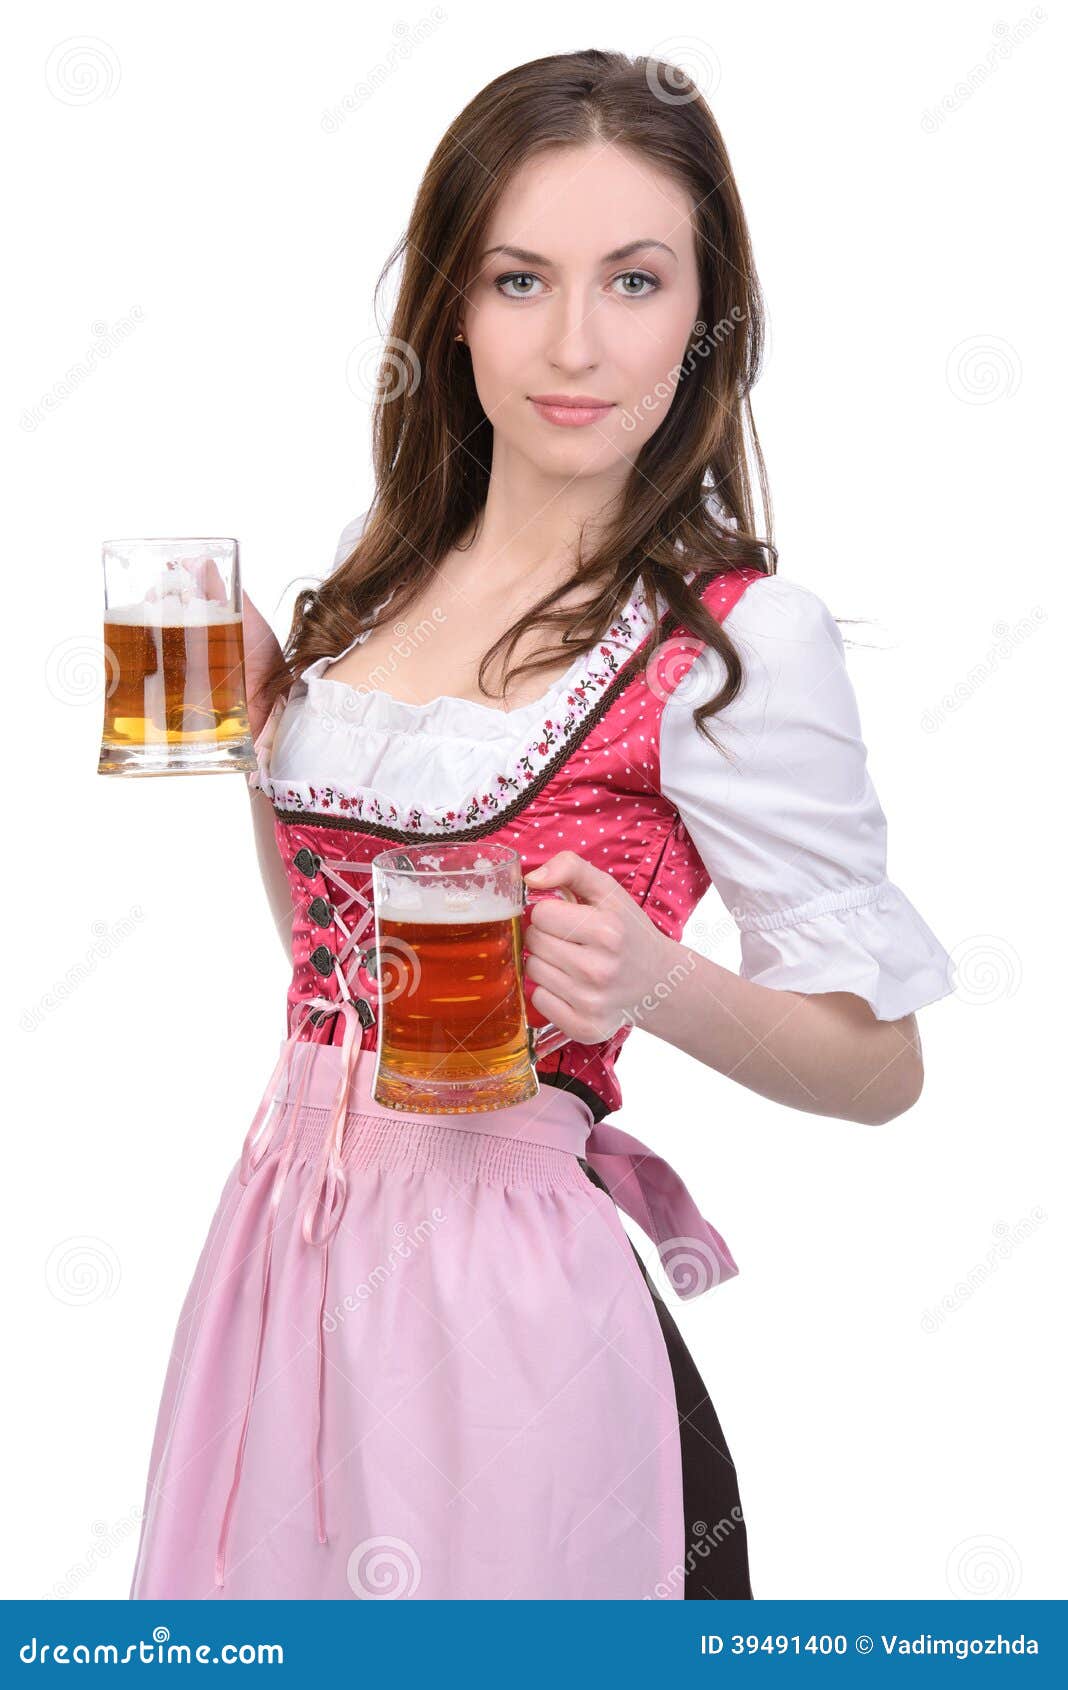 Girl with beer stock photo. Image of attractive, alcohol - 39491400